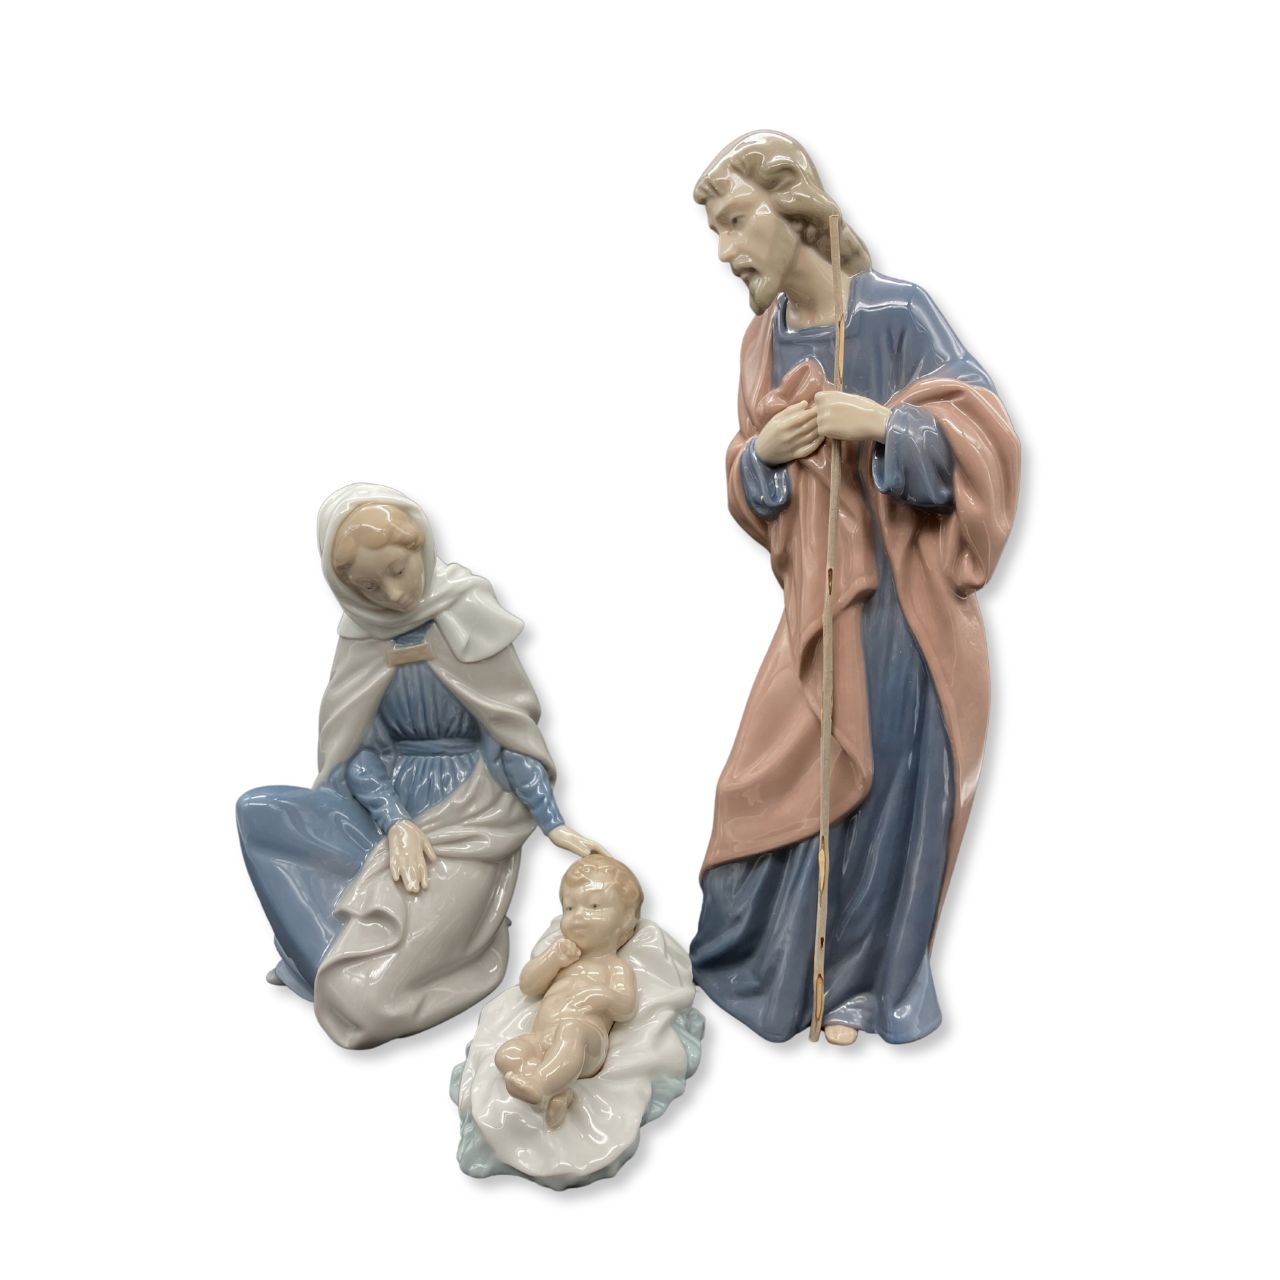 Nao by Lladro Saint Joseph  Nao porcelain figurine “Saint Joseph” from the Christmas Collection.  Sculpted by Salvador Furió, this figurine is part of the nativity set.  Nao Porcelain Figurines are produced in Valencia Spain and the Company is part of the Lladro family. Each piece is lovingly handmade and hand painted by the Valencia Artisans.